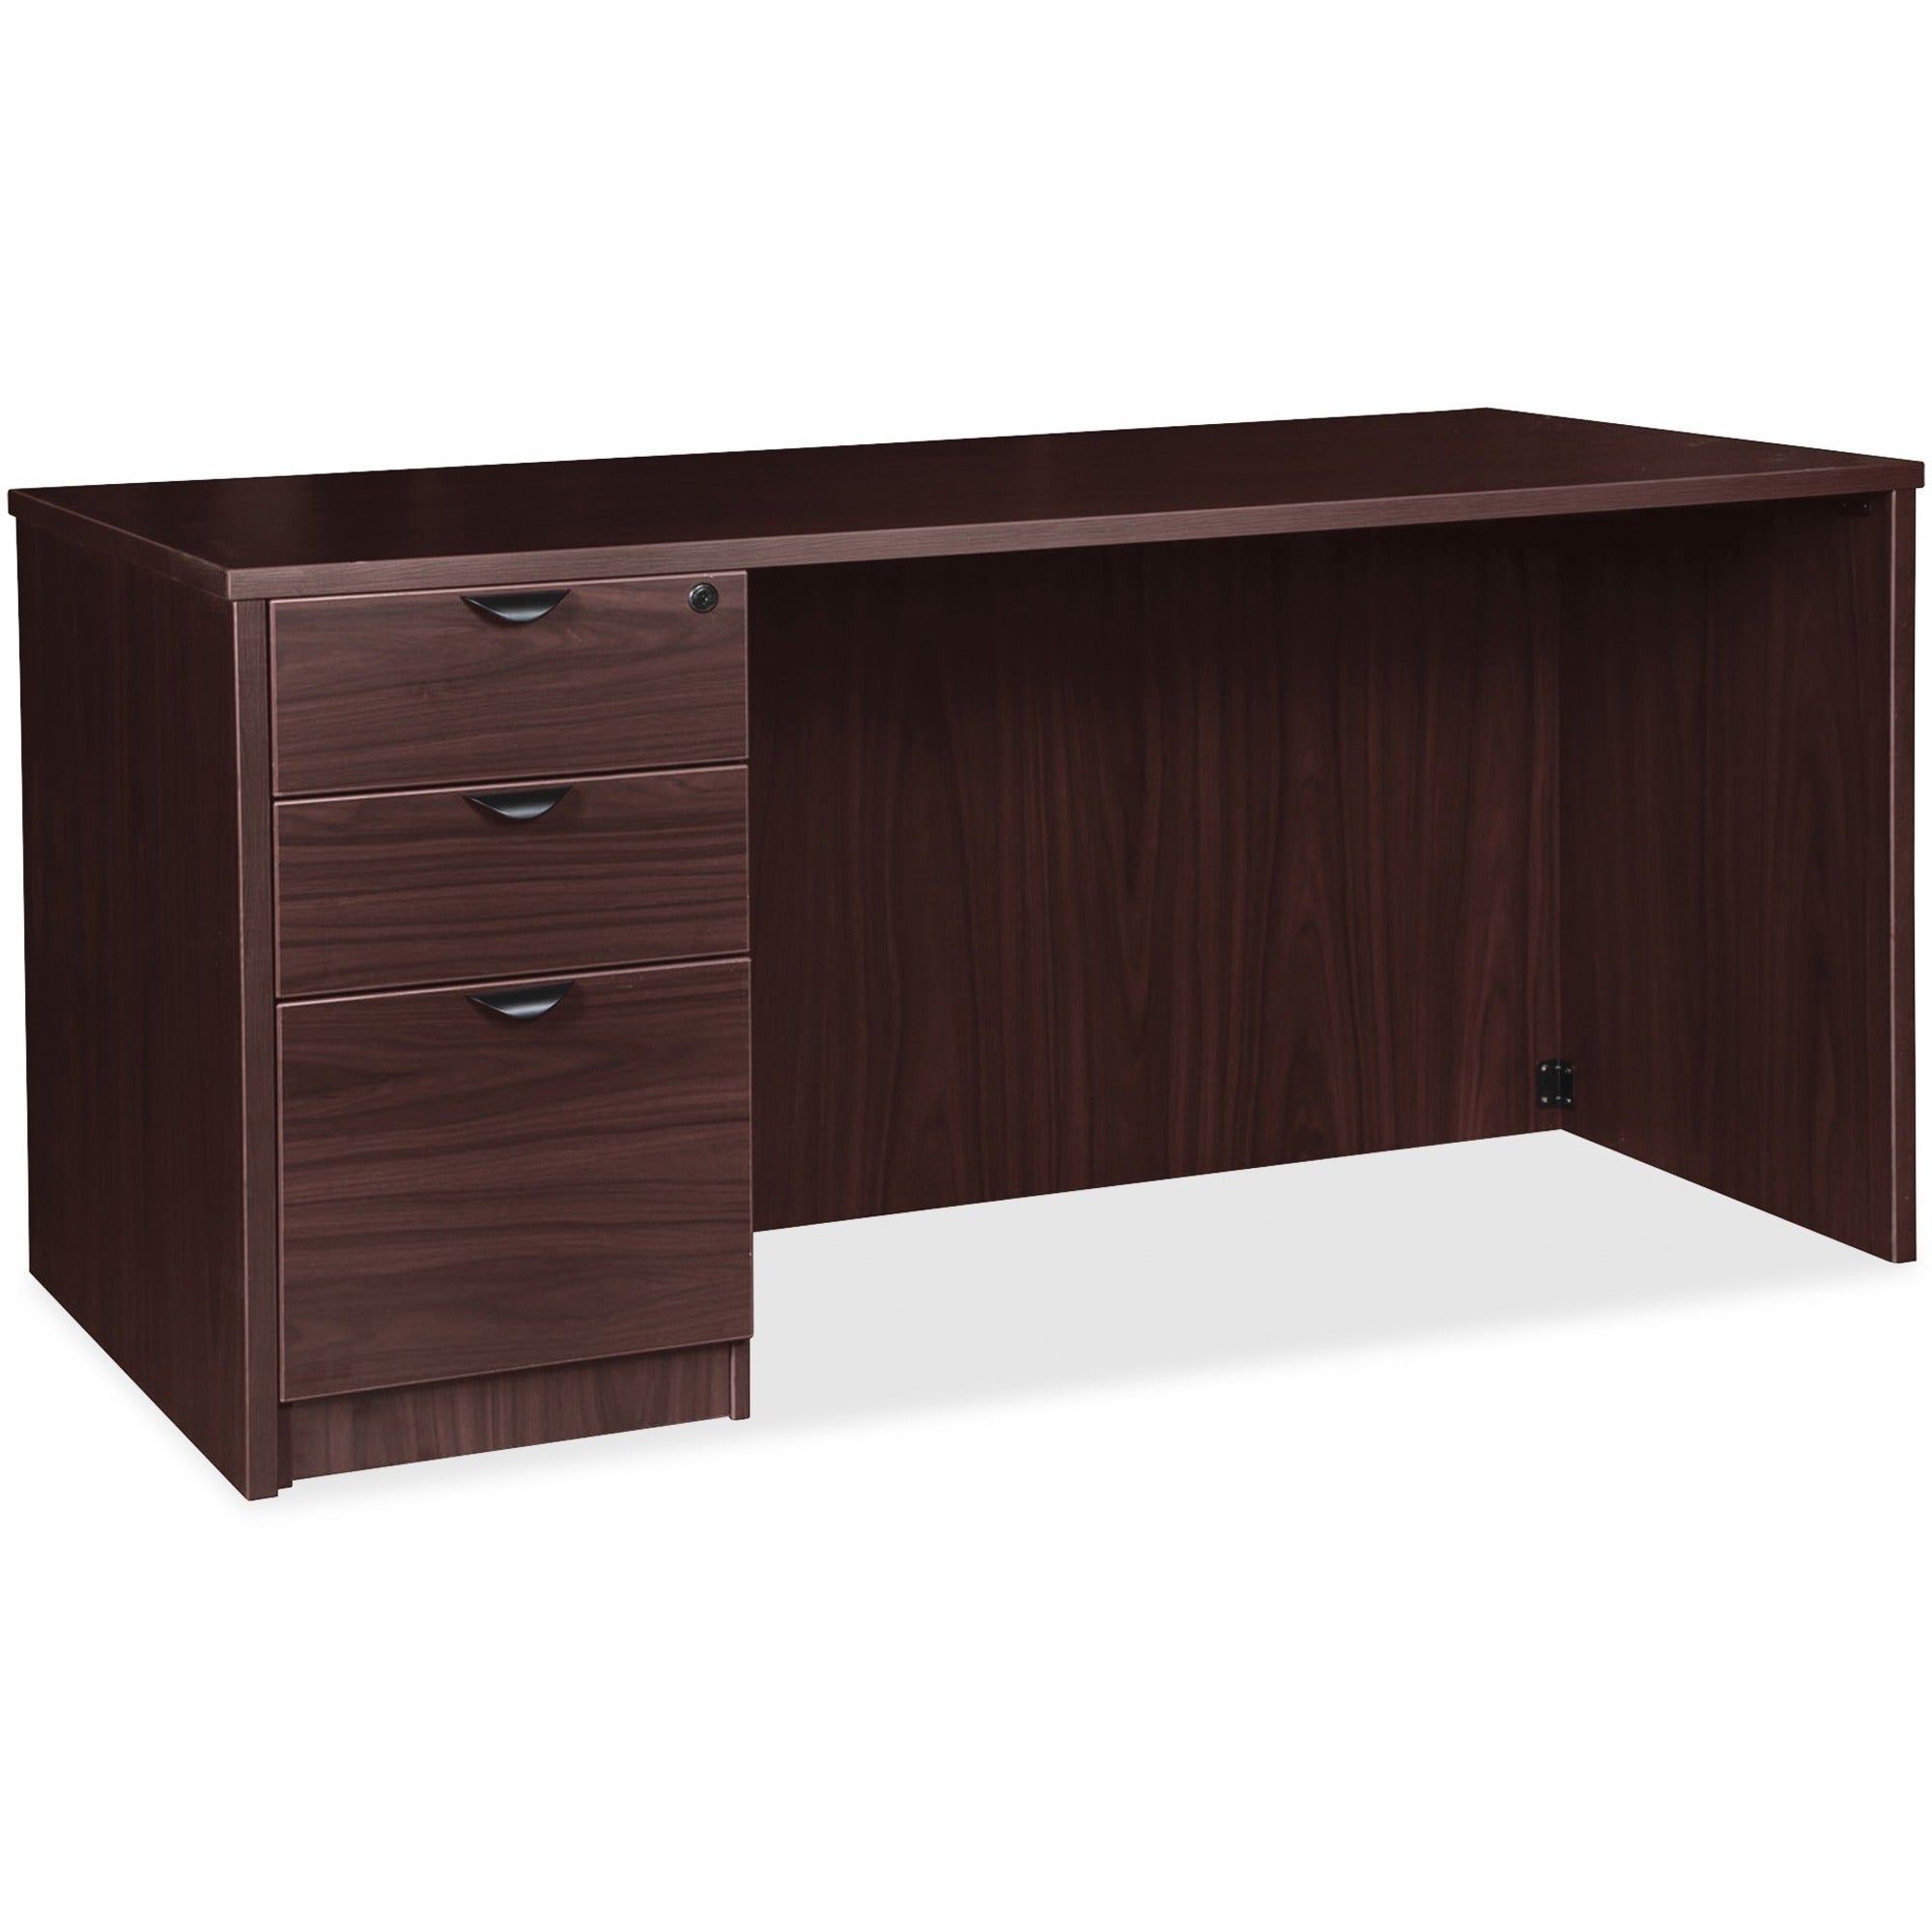 lorell-prominence-20-left-pedestal-desk-1-top-72-x-3629-3-x-file-box-drawers-single-pedestal-on-left-side-band-edge-material-particleboard-finish-espresso-laminate-thermofused-melamine-tfm_llrpd3672lspes - 1